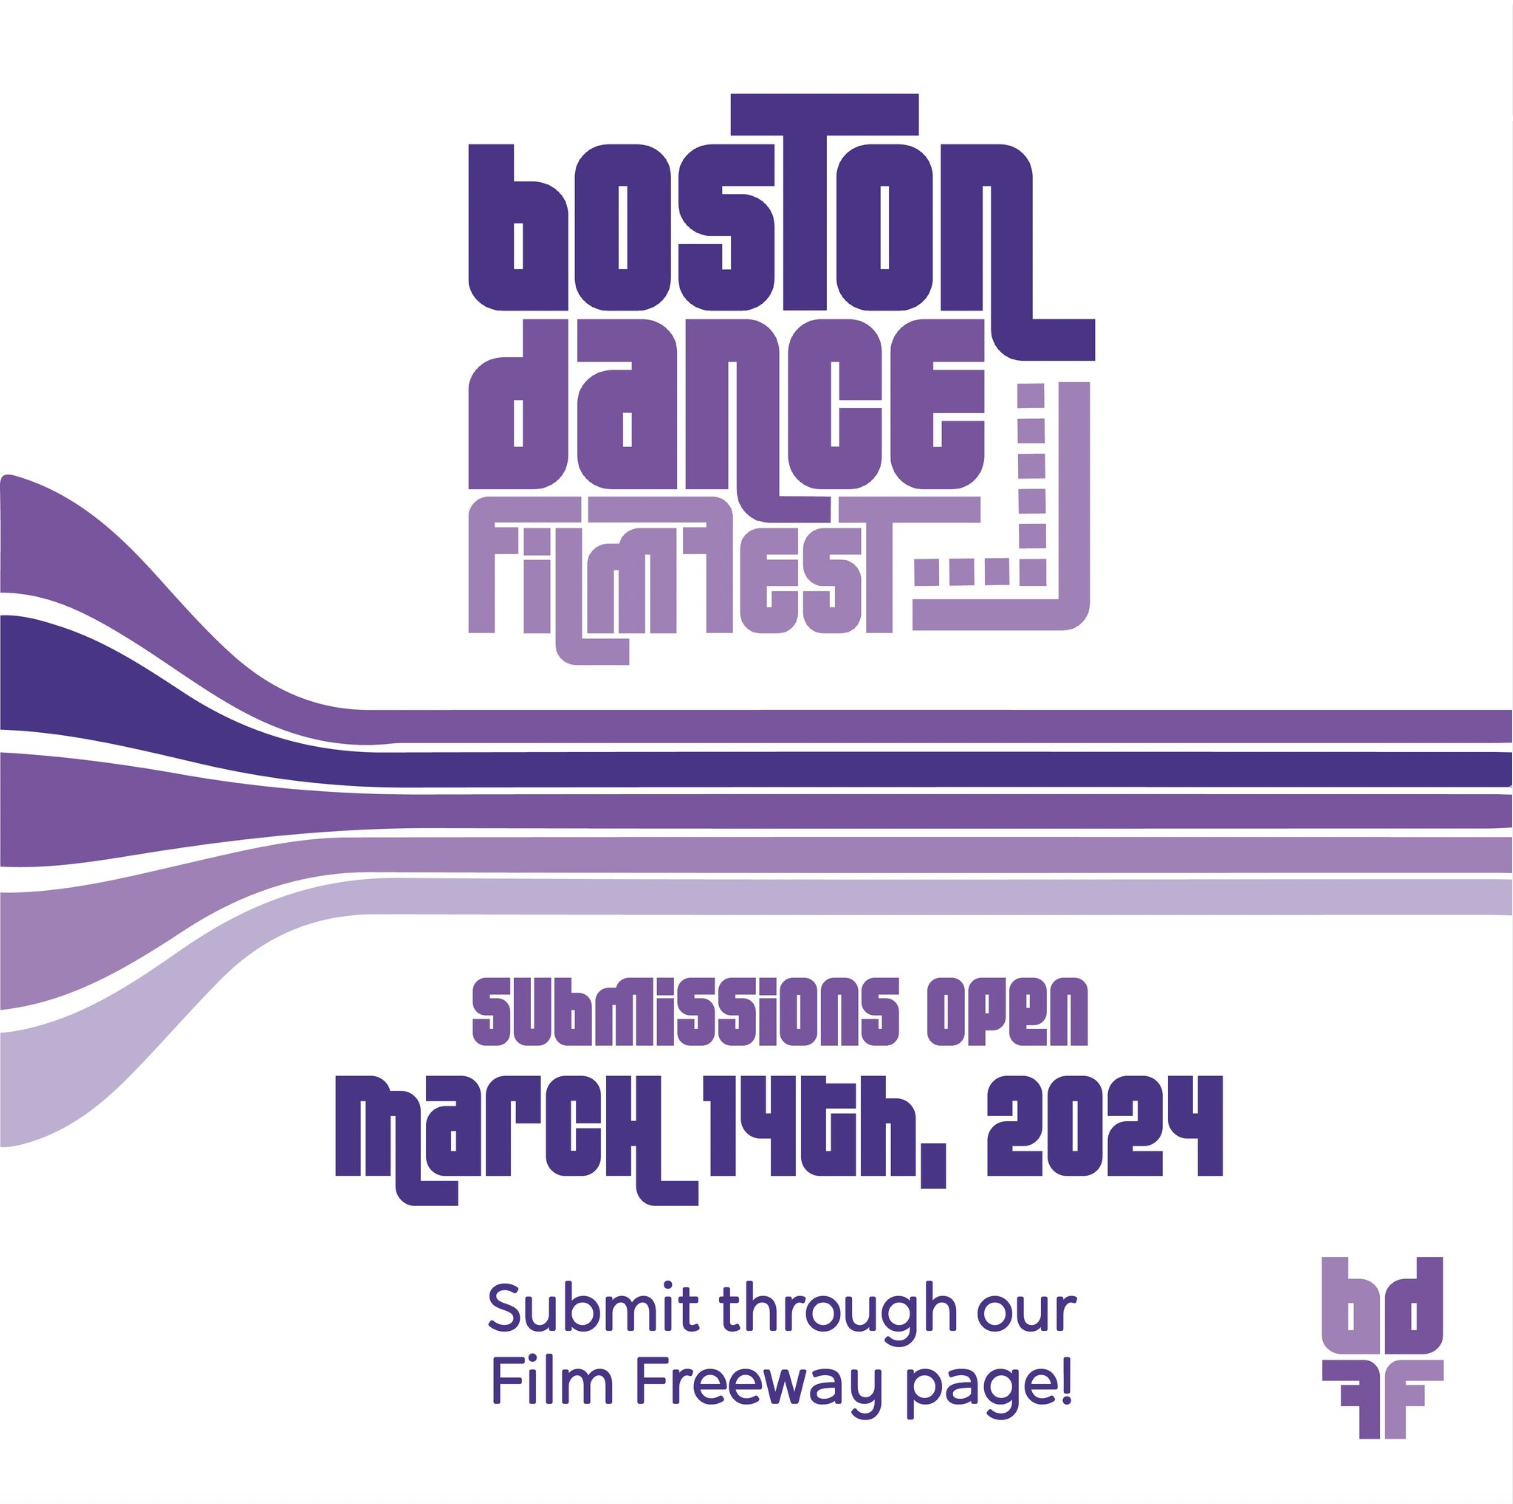 Boston Dance Film Fest poster with submission information.